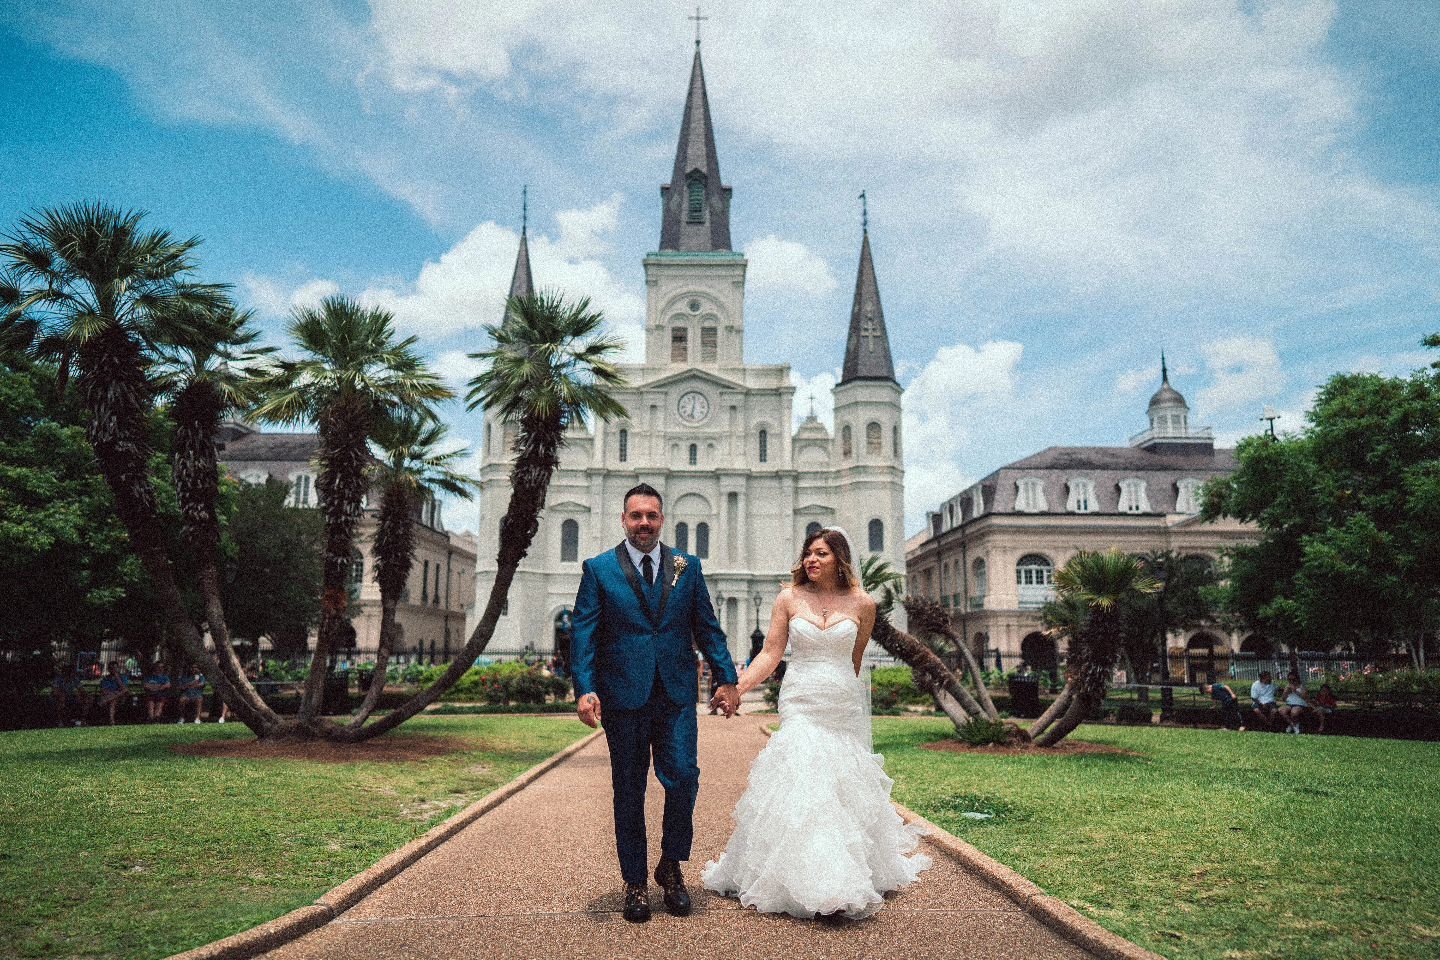 Delicious food🍤 
Gorgeous architecture⛪️ 
Killer music🎺 
Beautiful weddings💍 

The Big Easy has a little bit of everything🎭